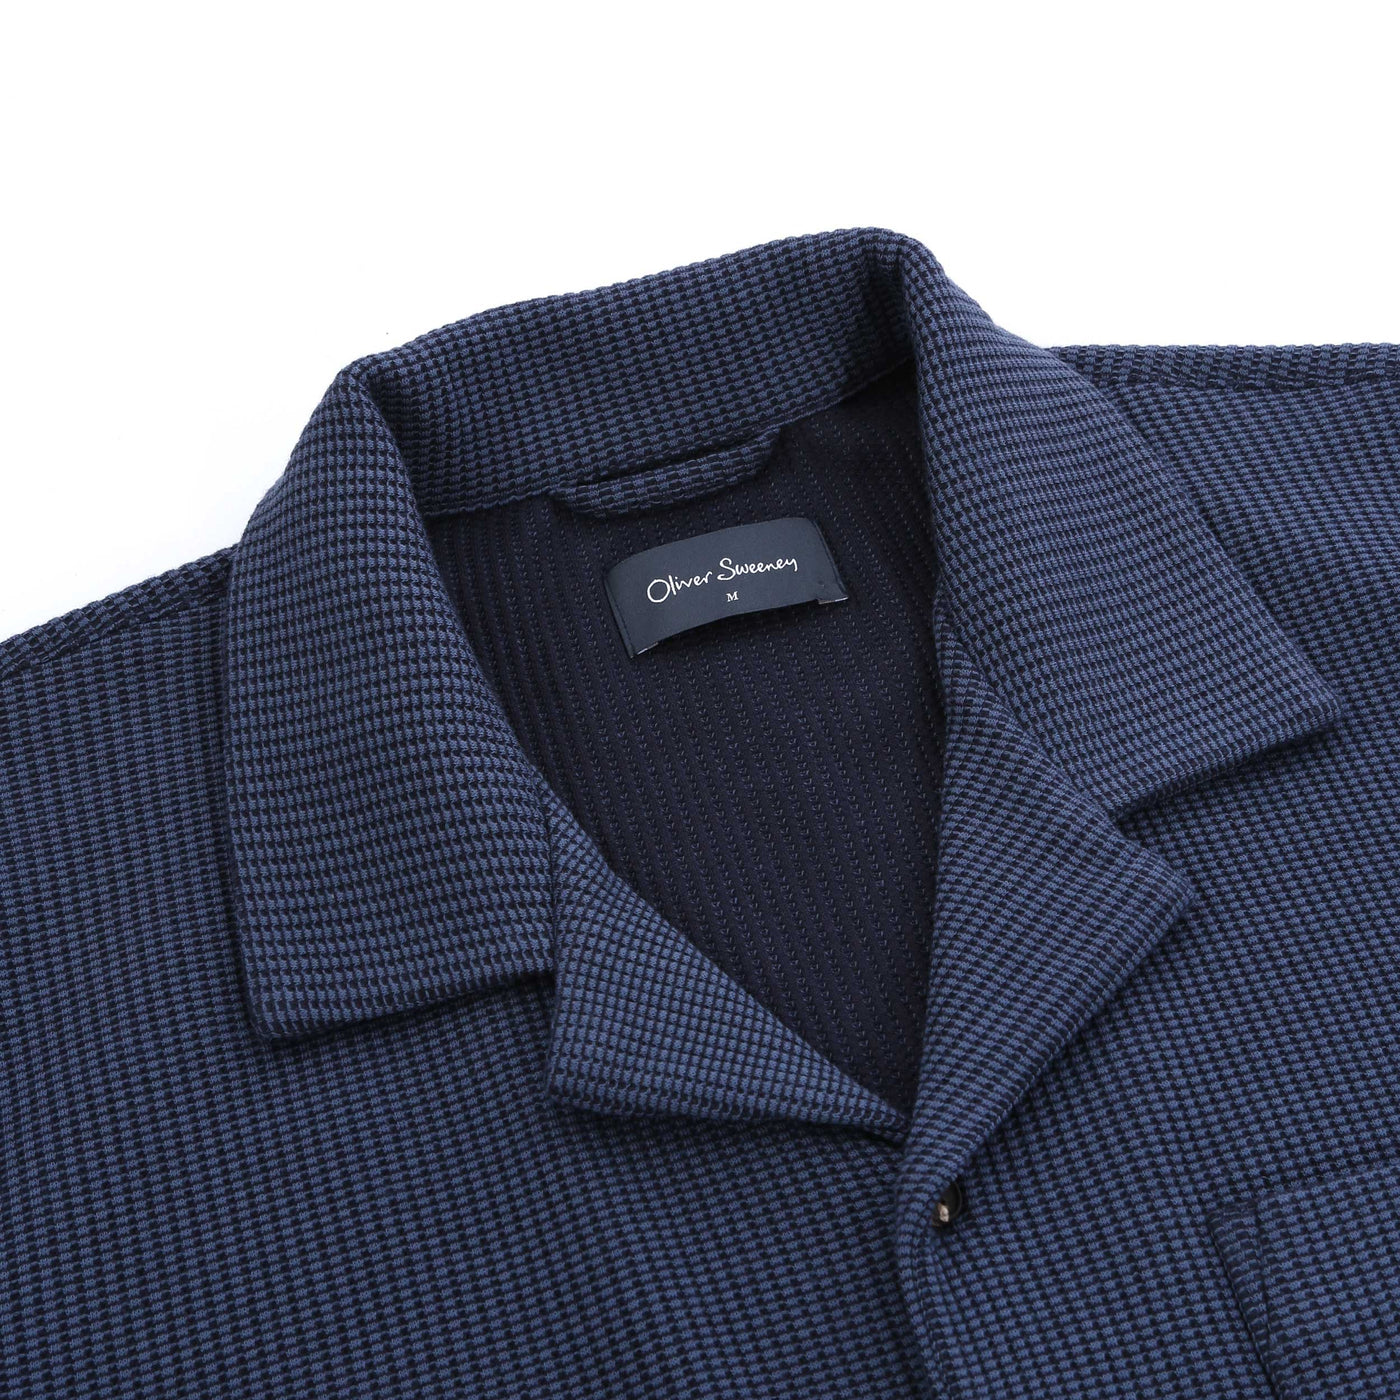 Oliver Sweeney Ravenshead SS Shirt in French Blue Collar